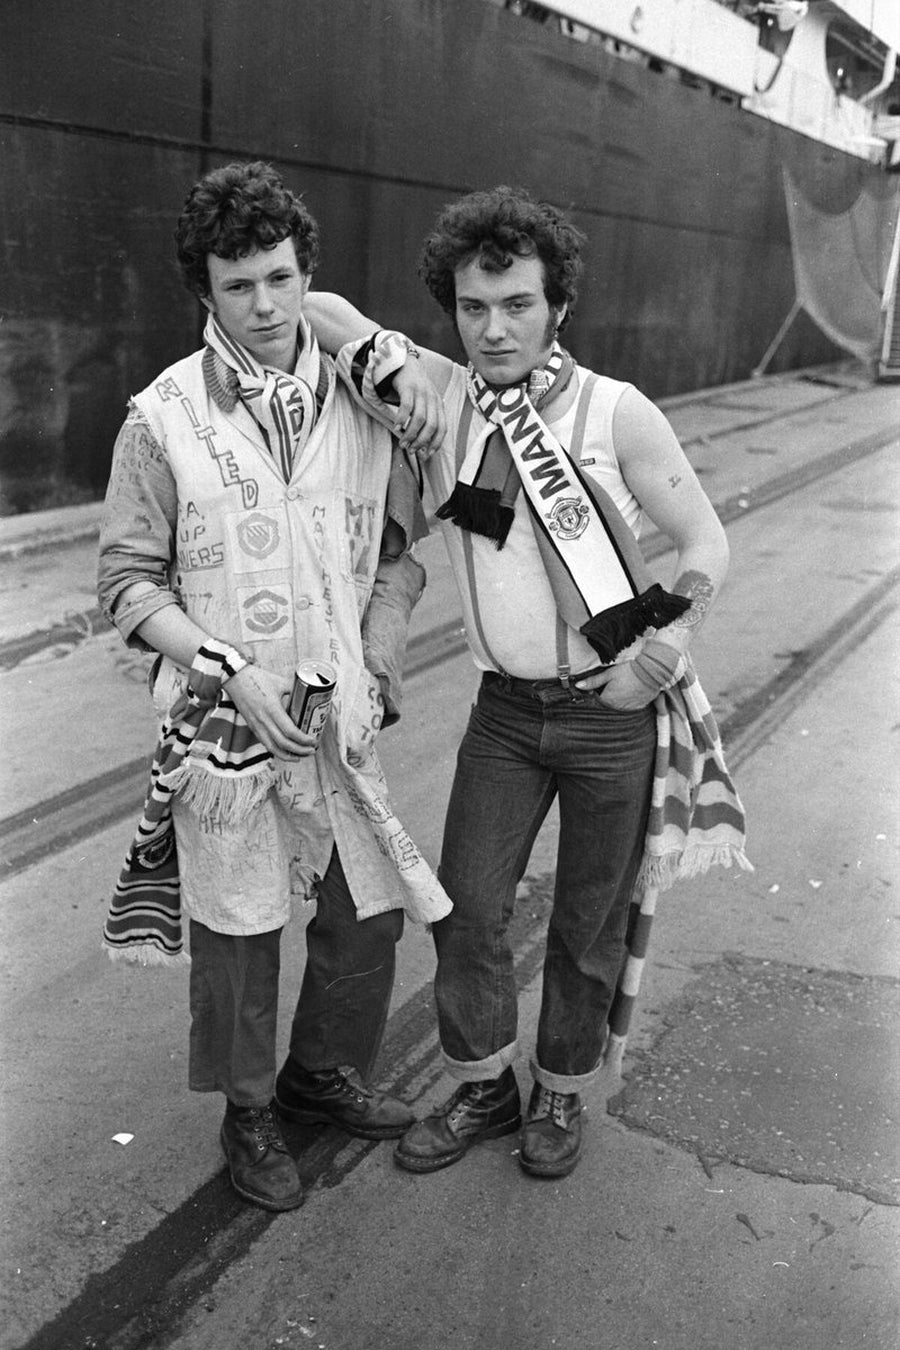 Two Manchester United Fans in Front of A Ship by Iain SP Reid - c. 1976